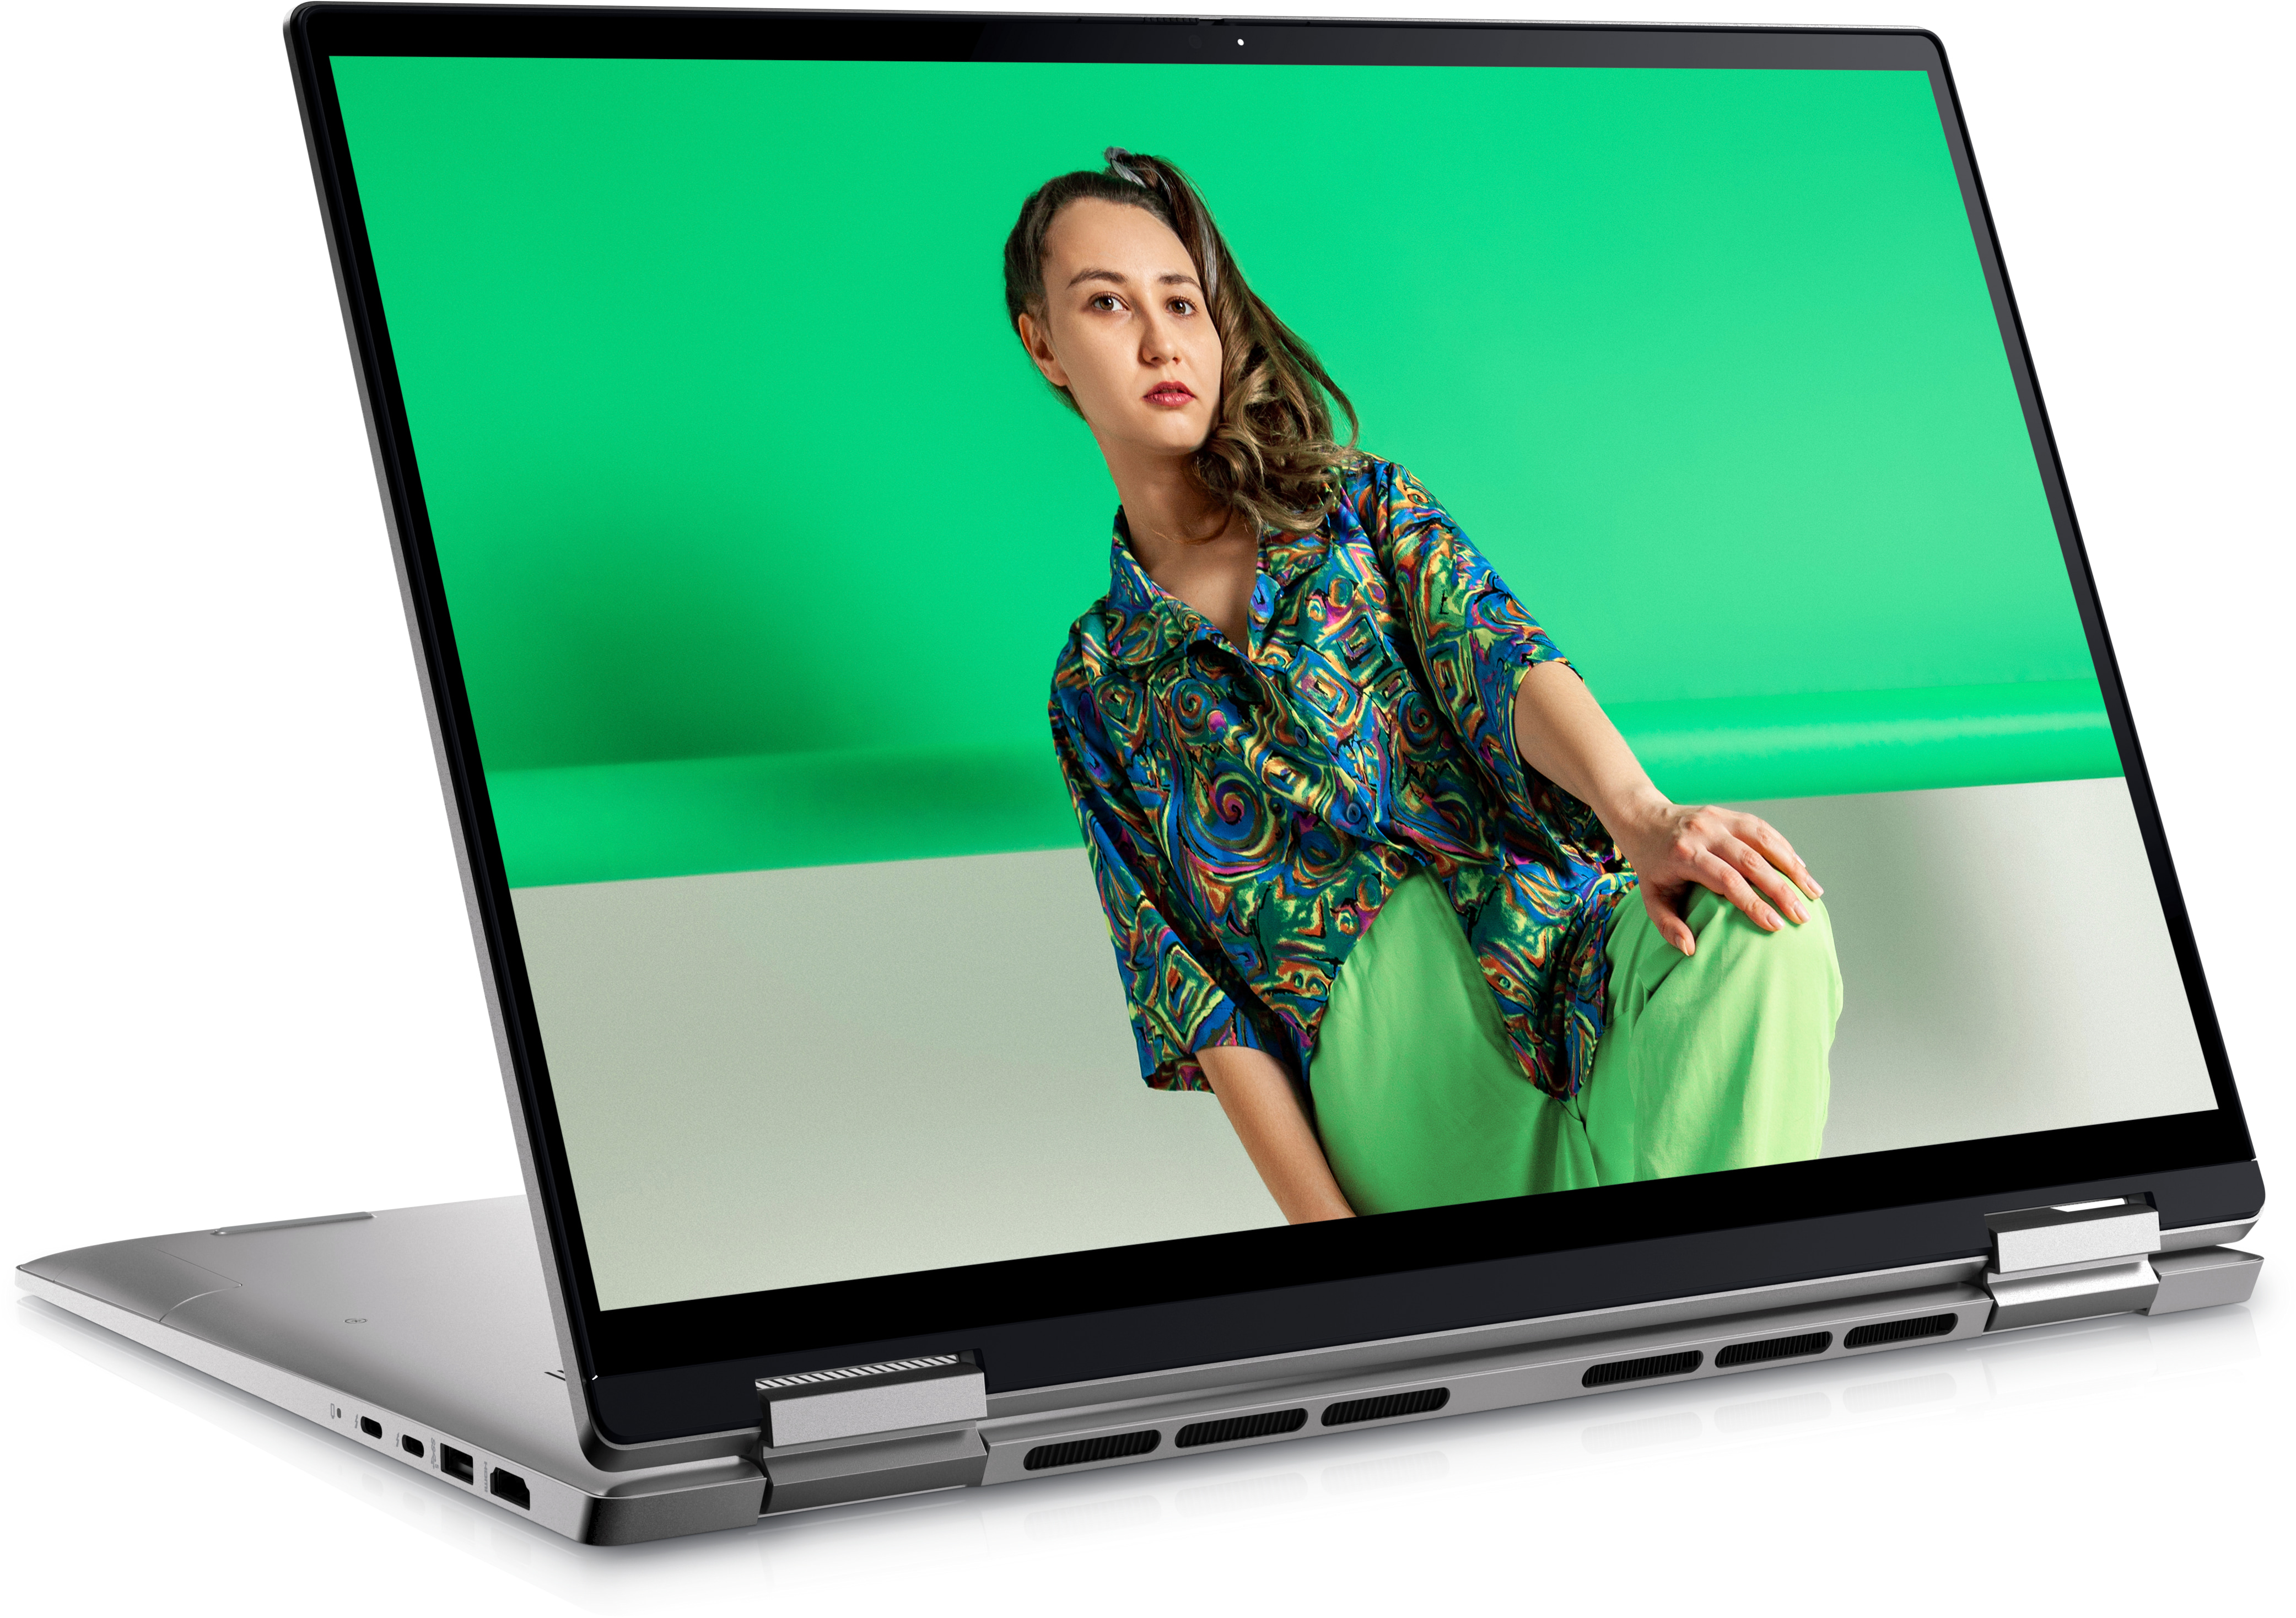 Inspiron 16-inch 2-in-1 Laptop with Intel® Core™ processor | Dell USA